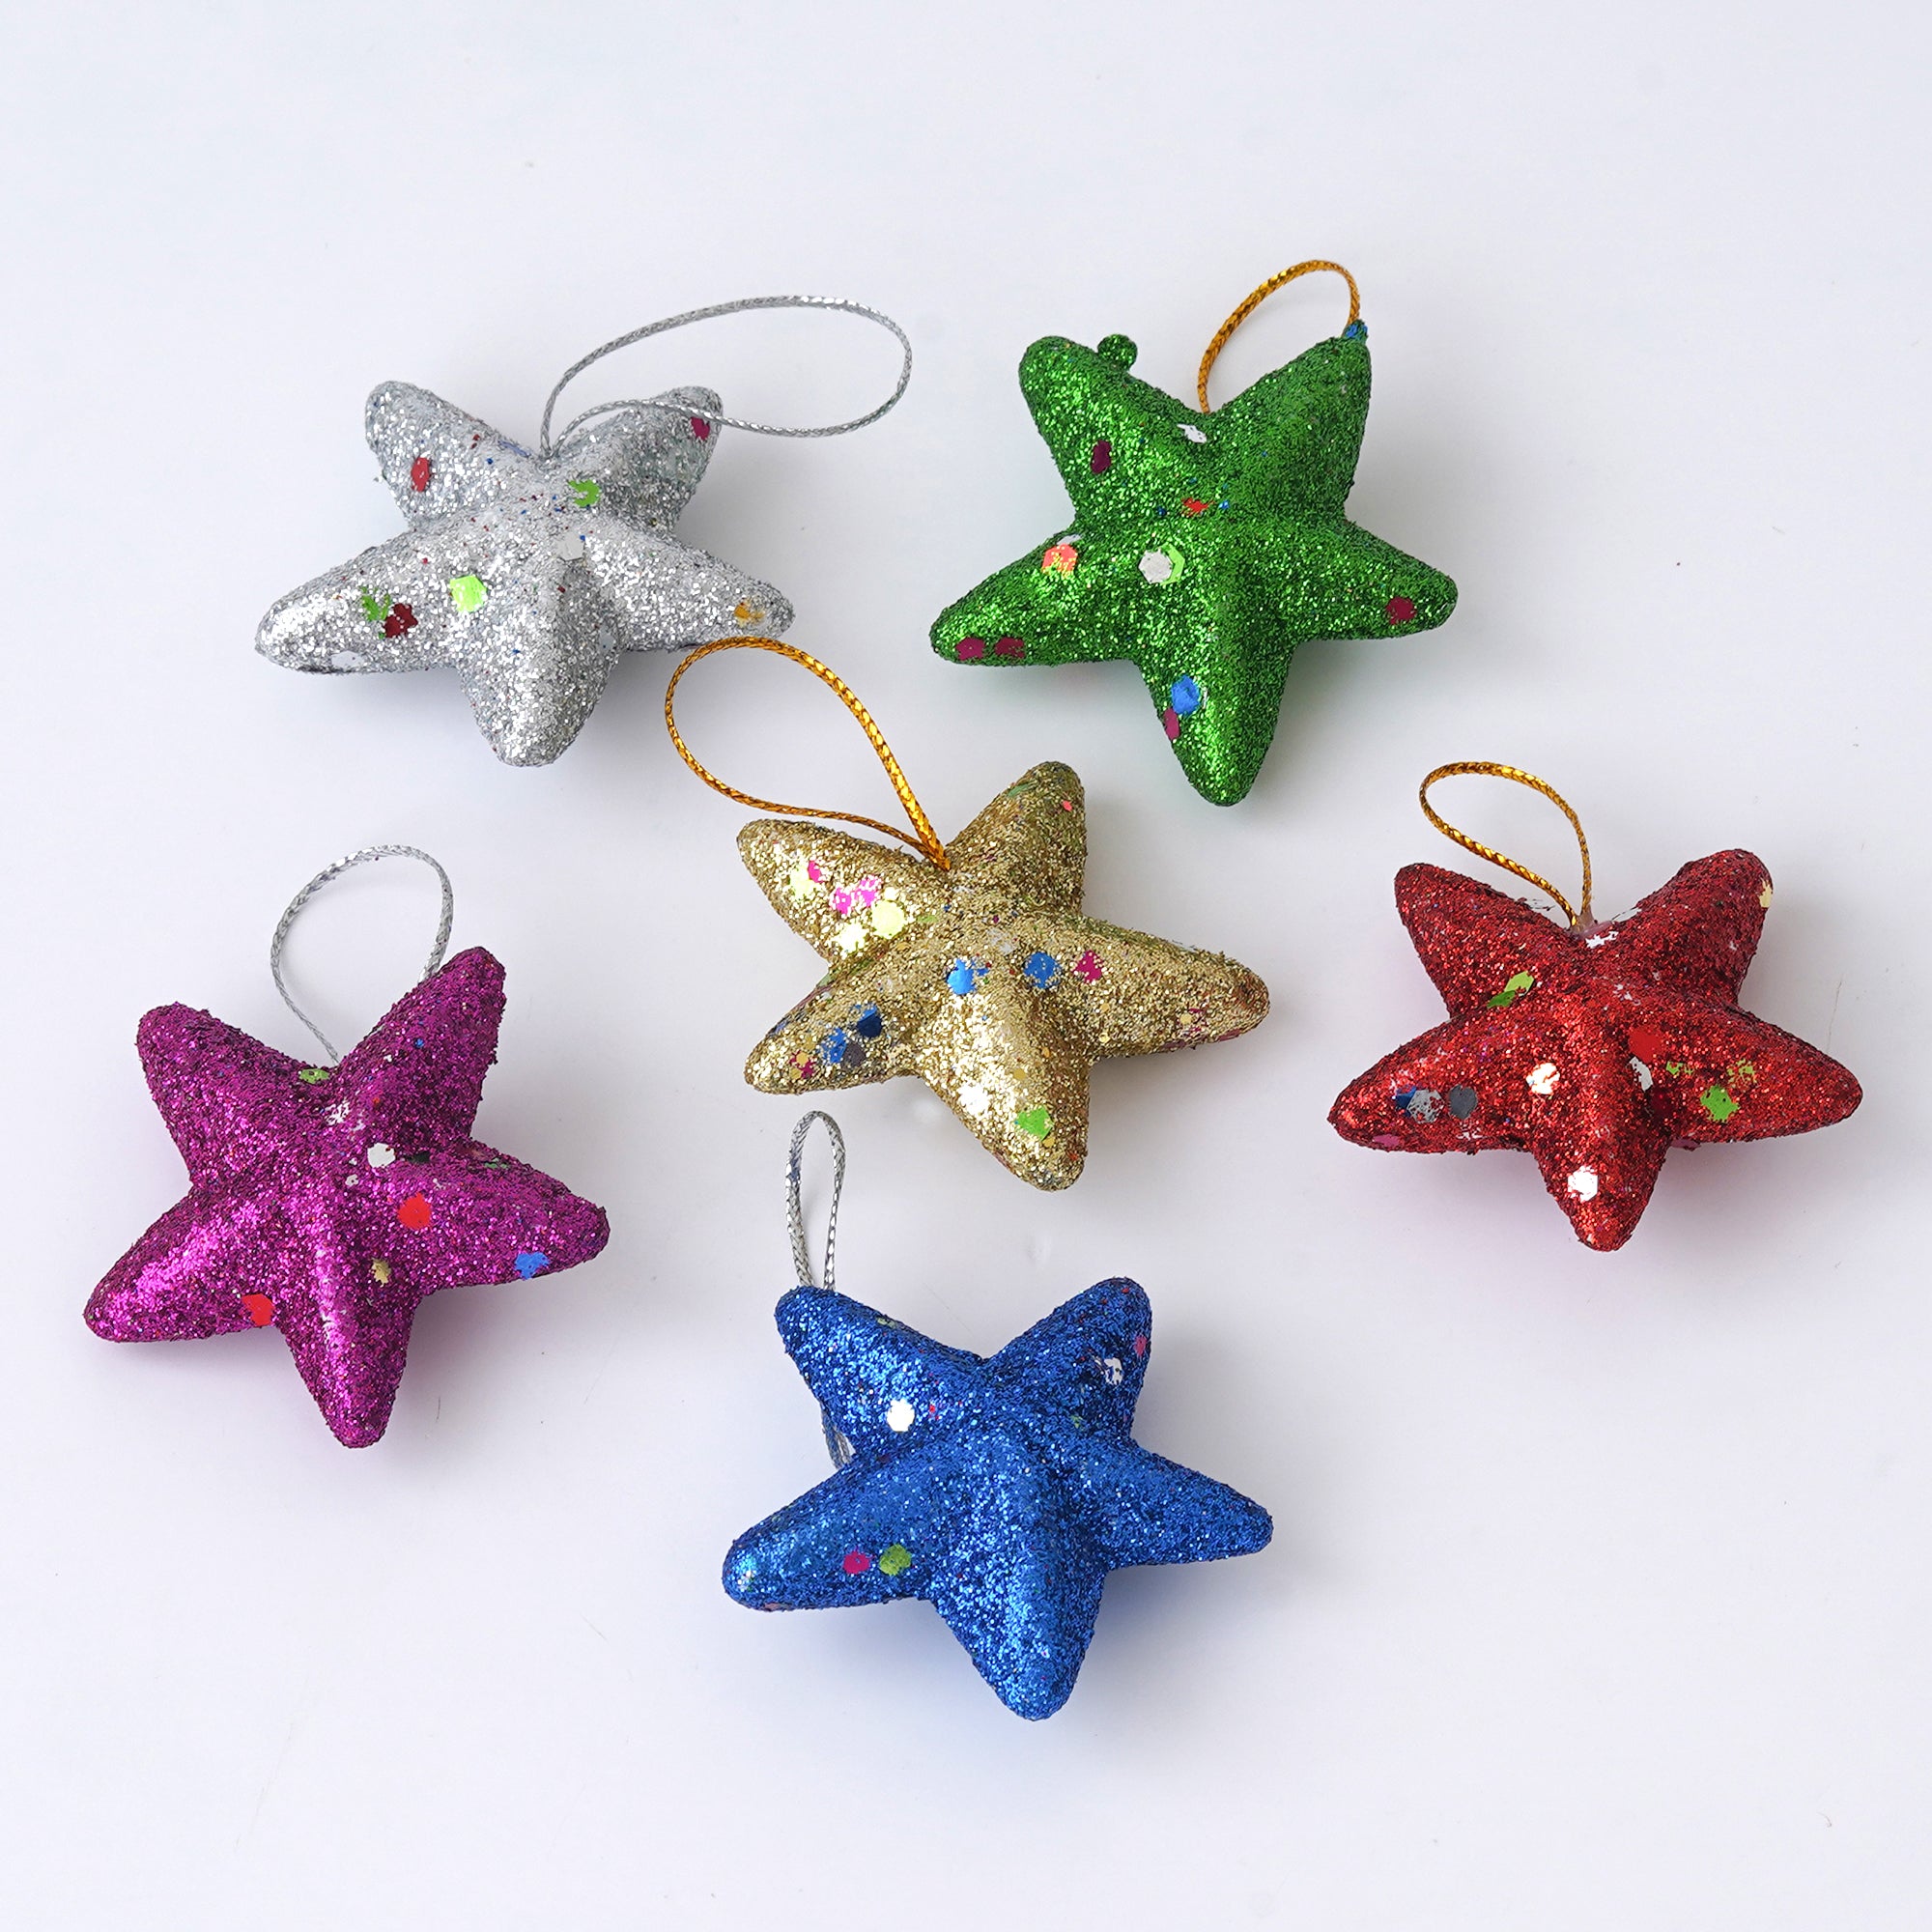 eCraftIndia Multicolor Glittering Xmas Stars for Decorating Christmas Tree and Hanging on Walls, Doors Set of 5 Pieces 2